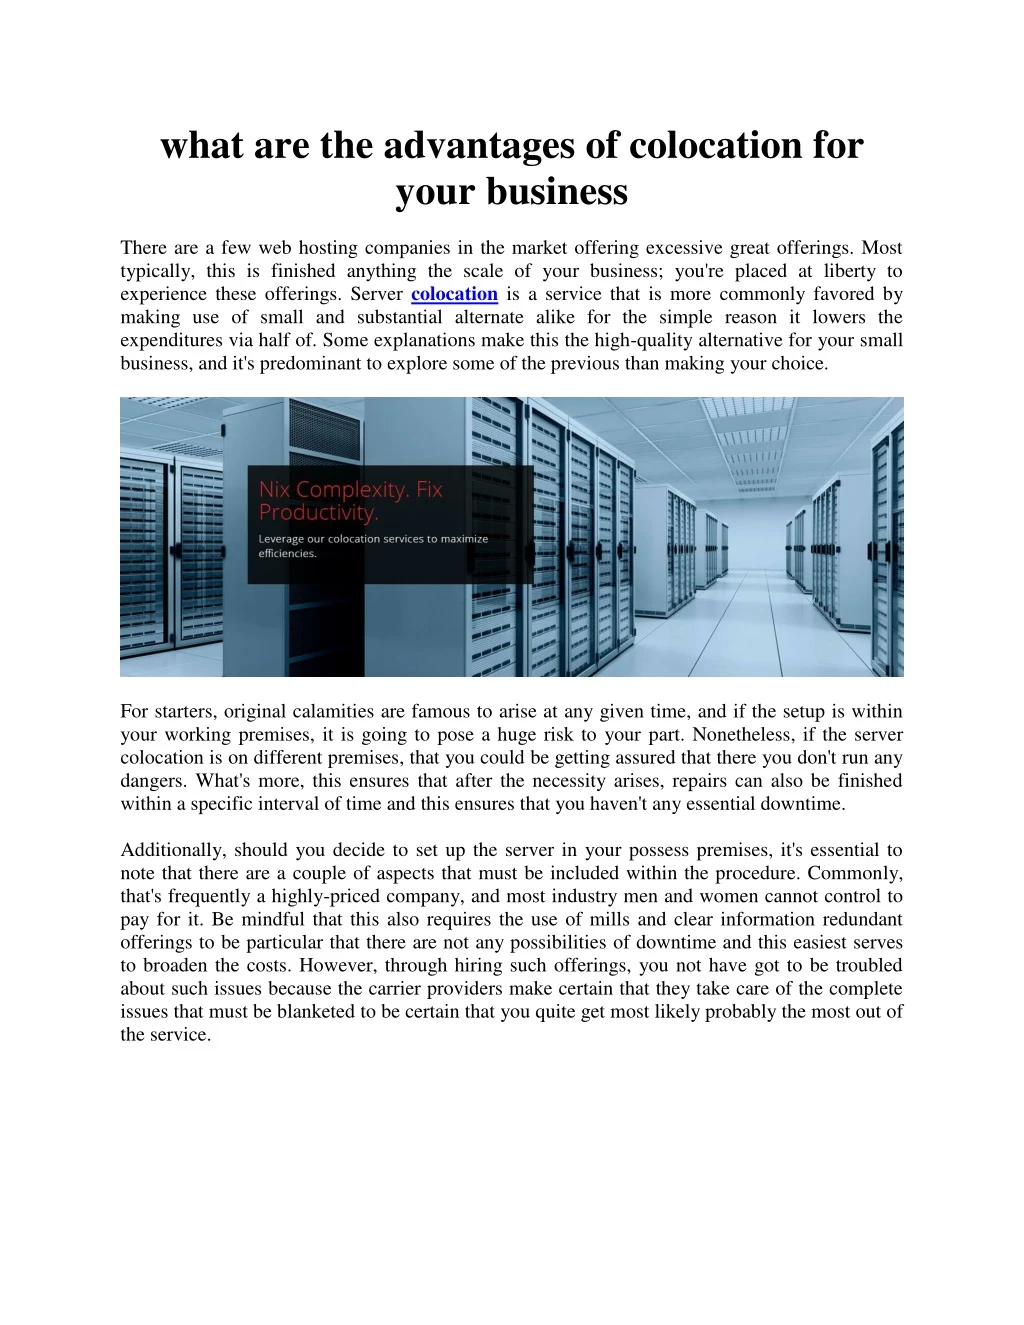 what are the advantages of colocation for your